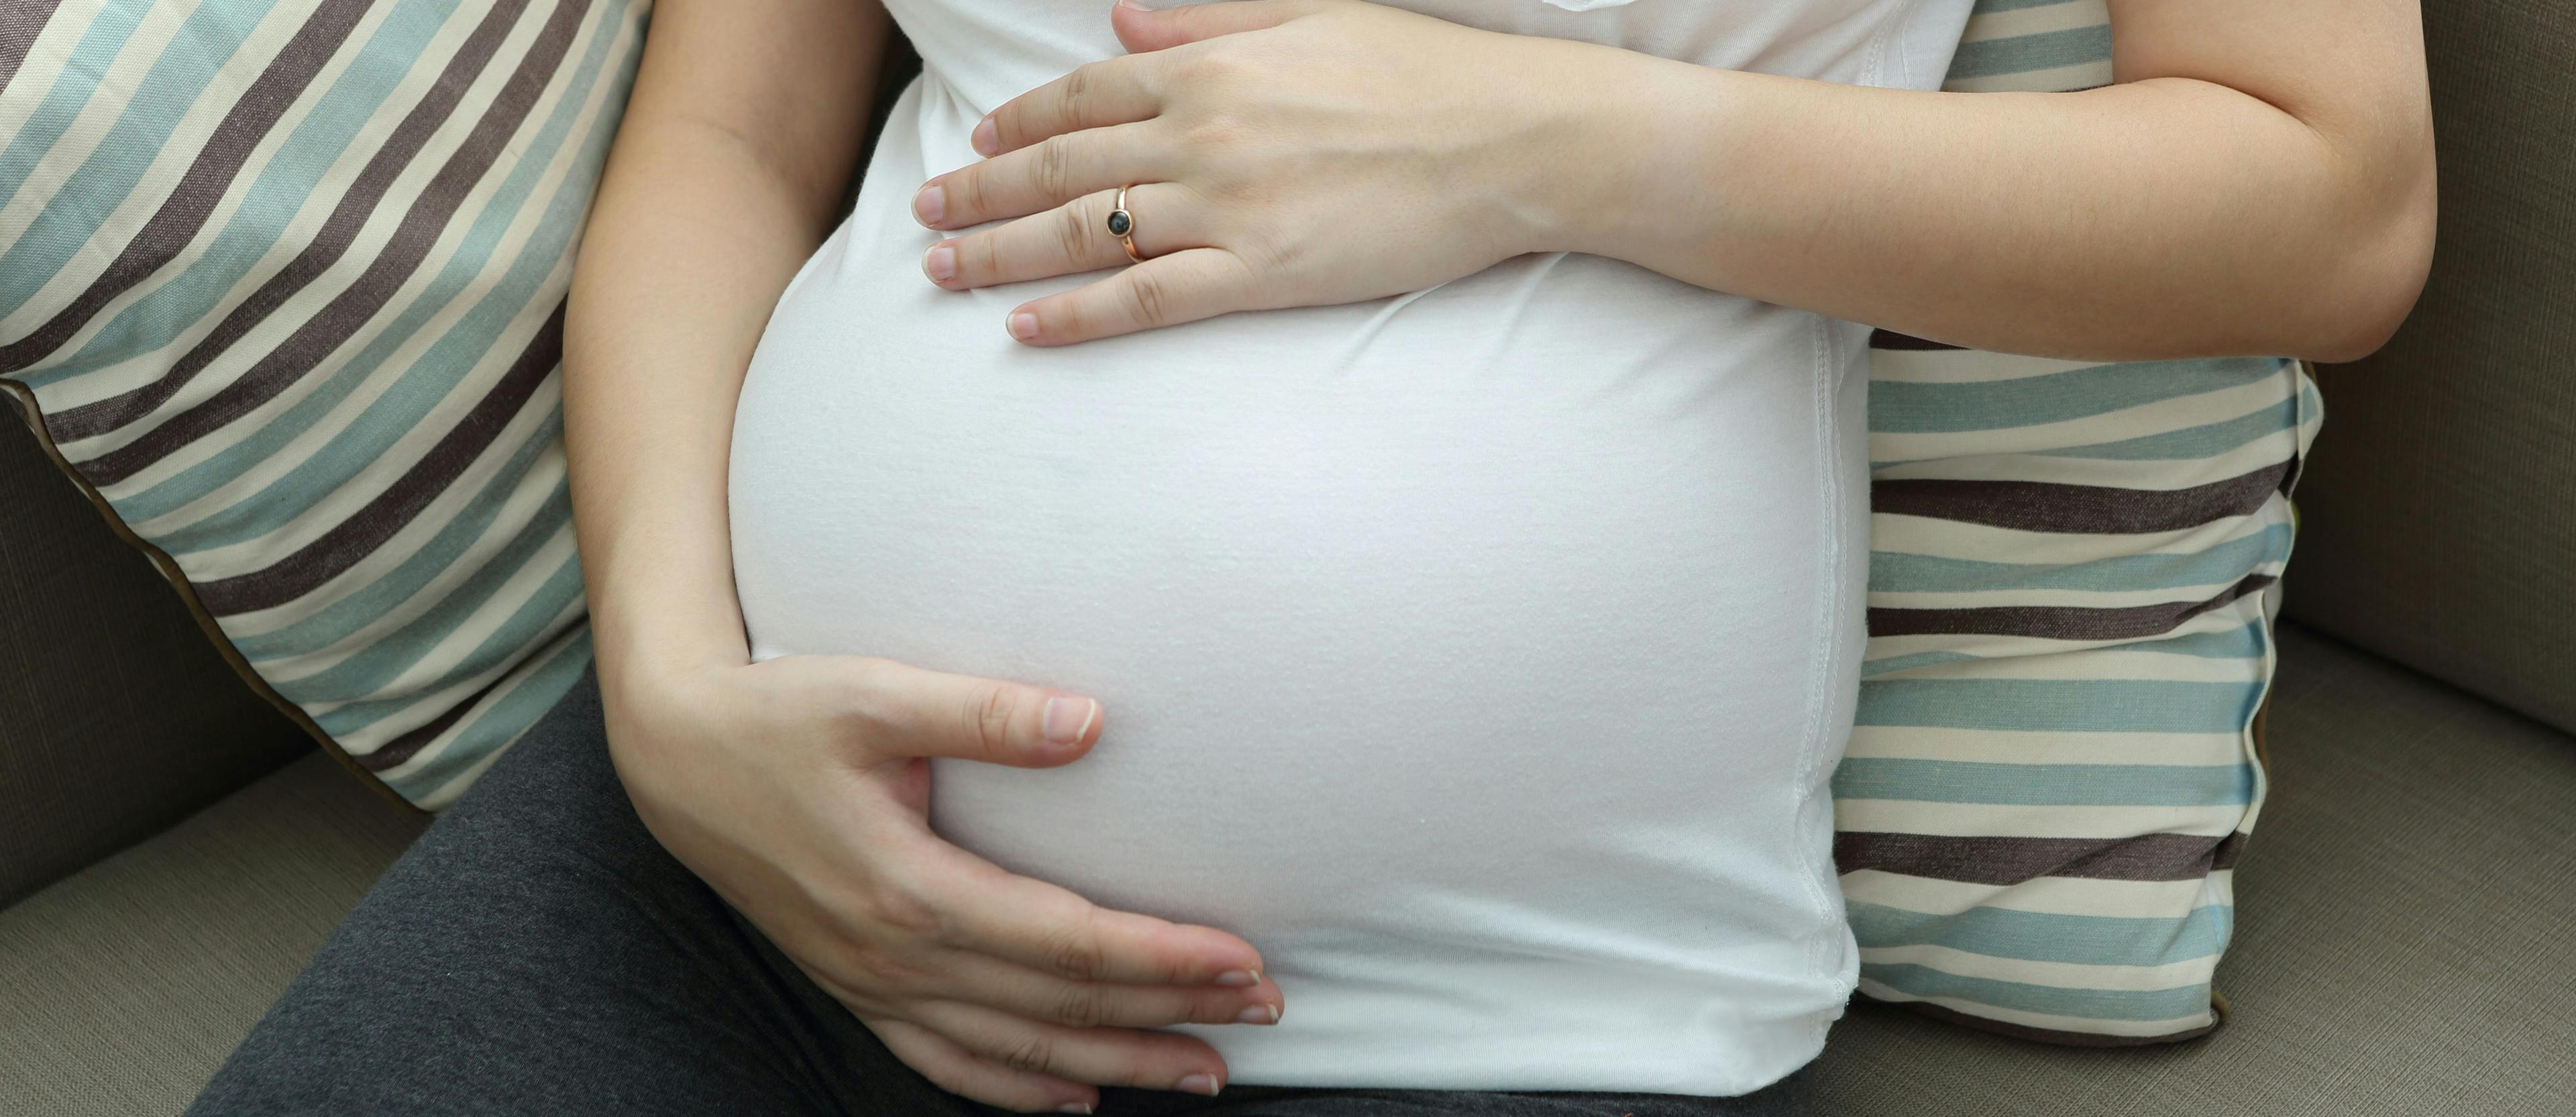 Gestational Diabetes Risk Higher in Women with Depression History